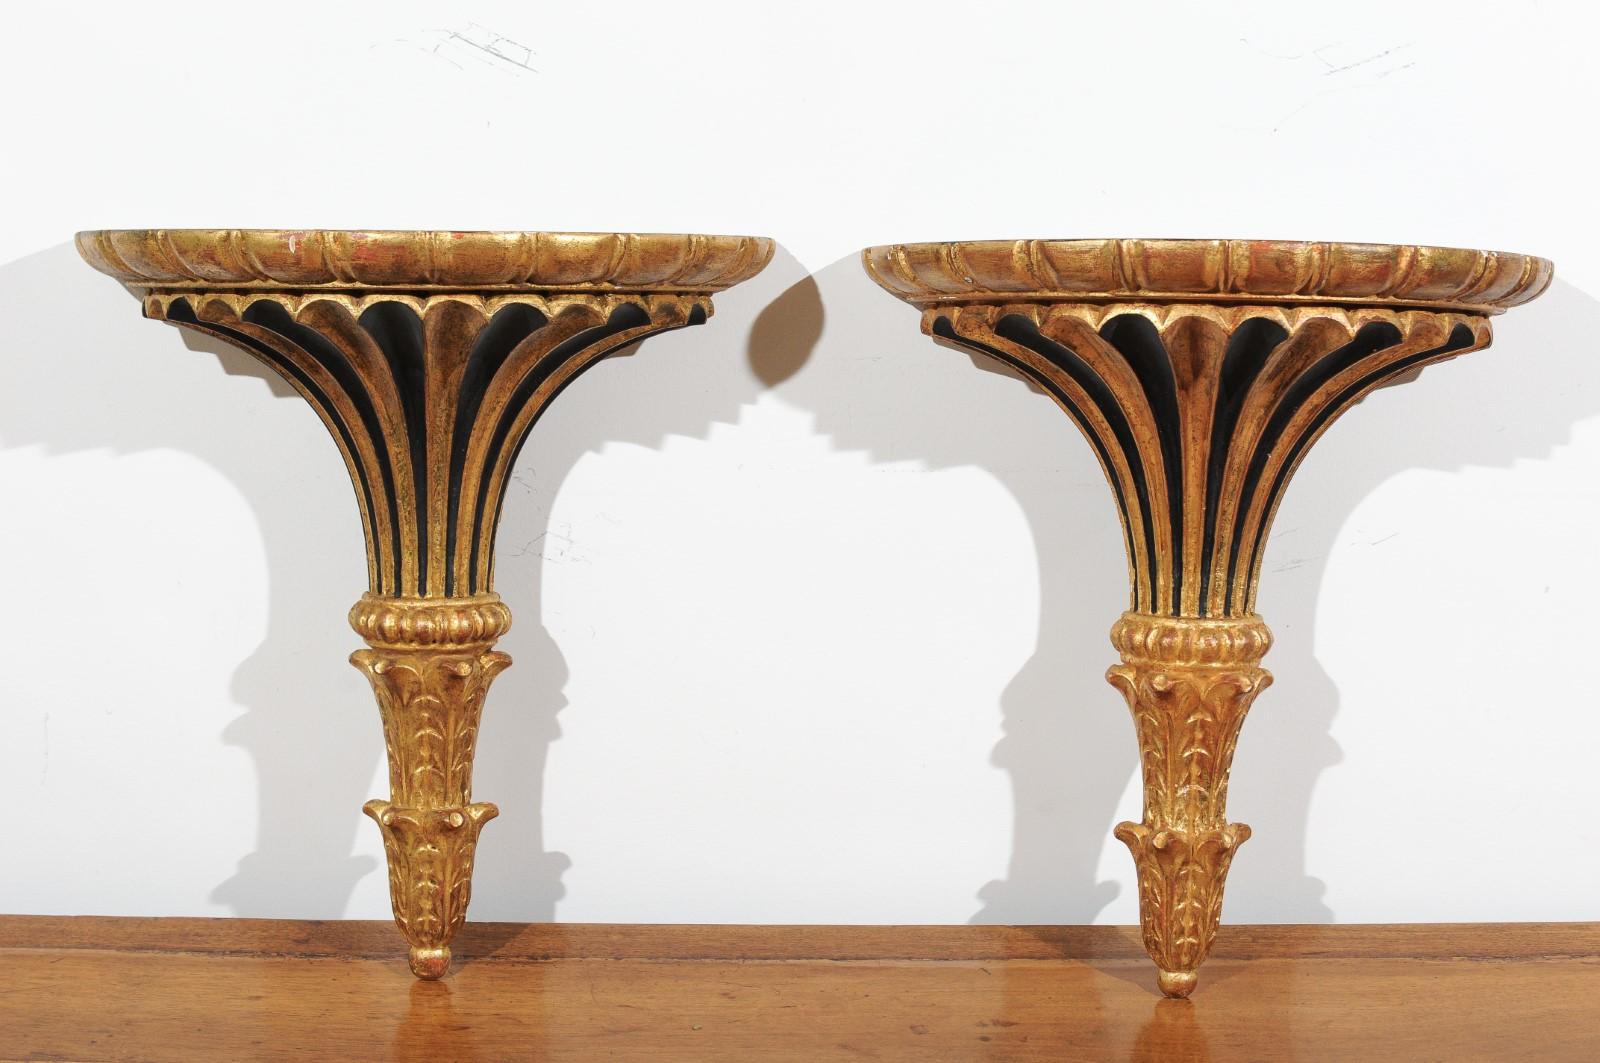 A pair of Italian painted and carved wall brackets from the late 19th century, with black and gold accents. Born in Italy during the third quarter of the 19th century, each of this pair of wall brackets features a flared gilded body presenting a